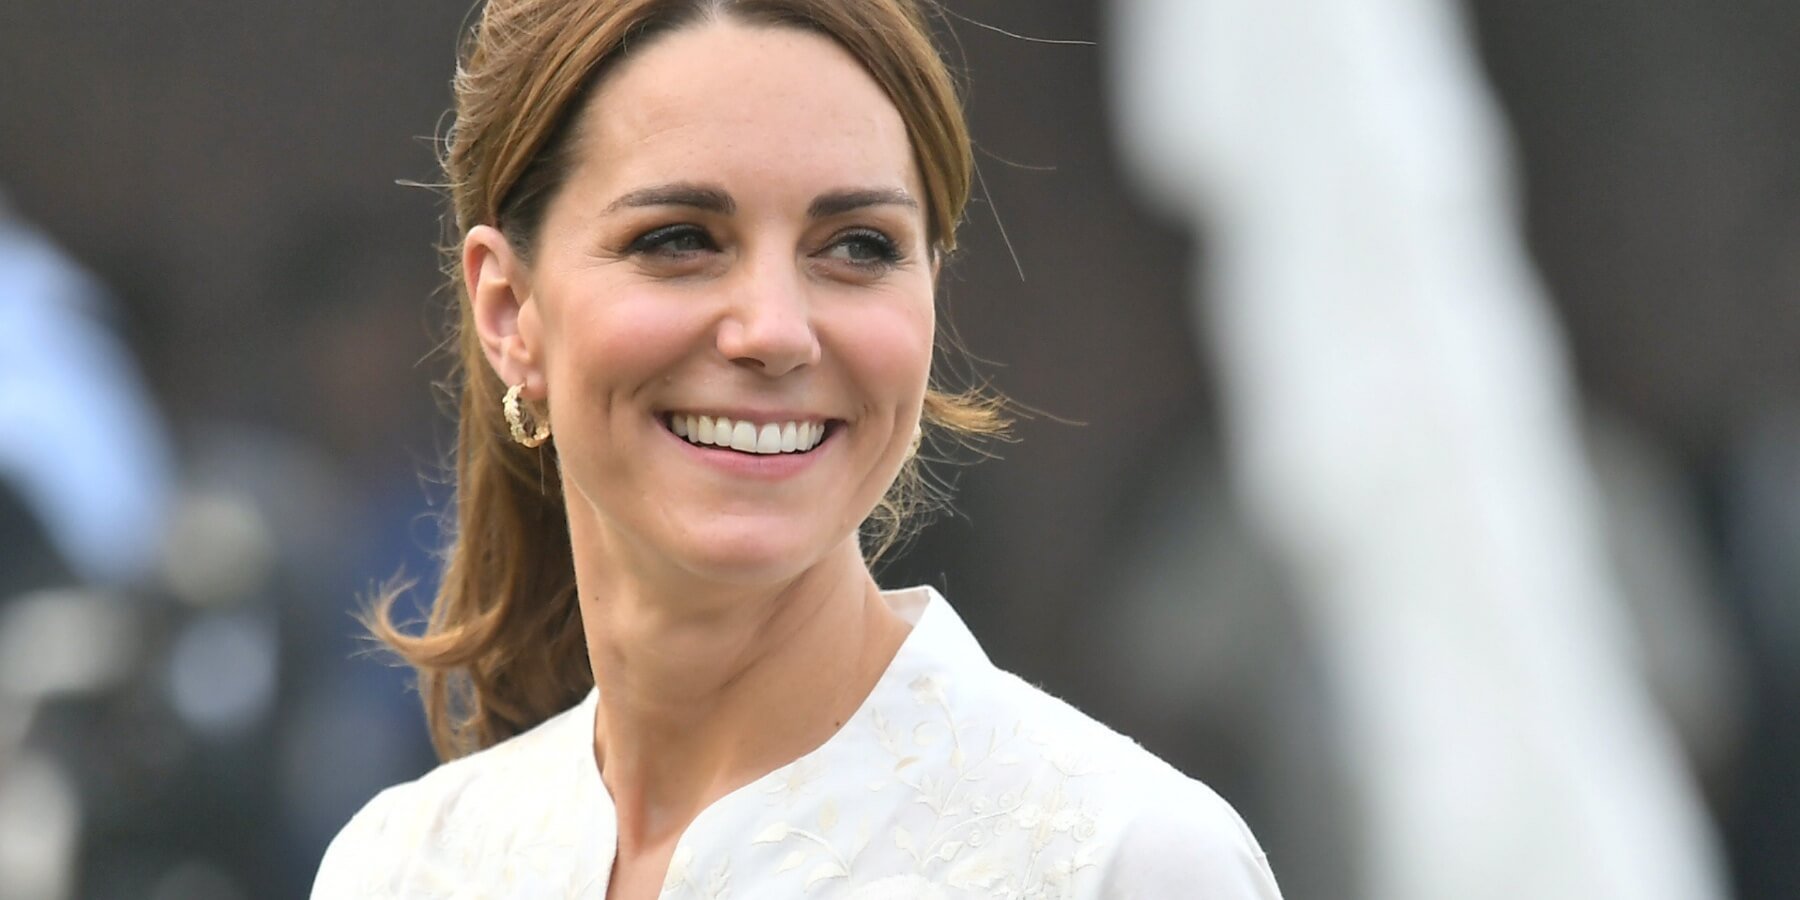 Kate Middleton may or may not talk about her illness in the future